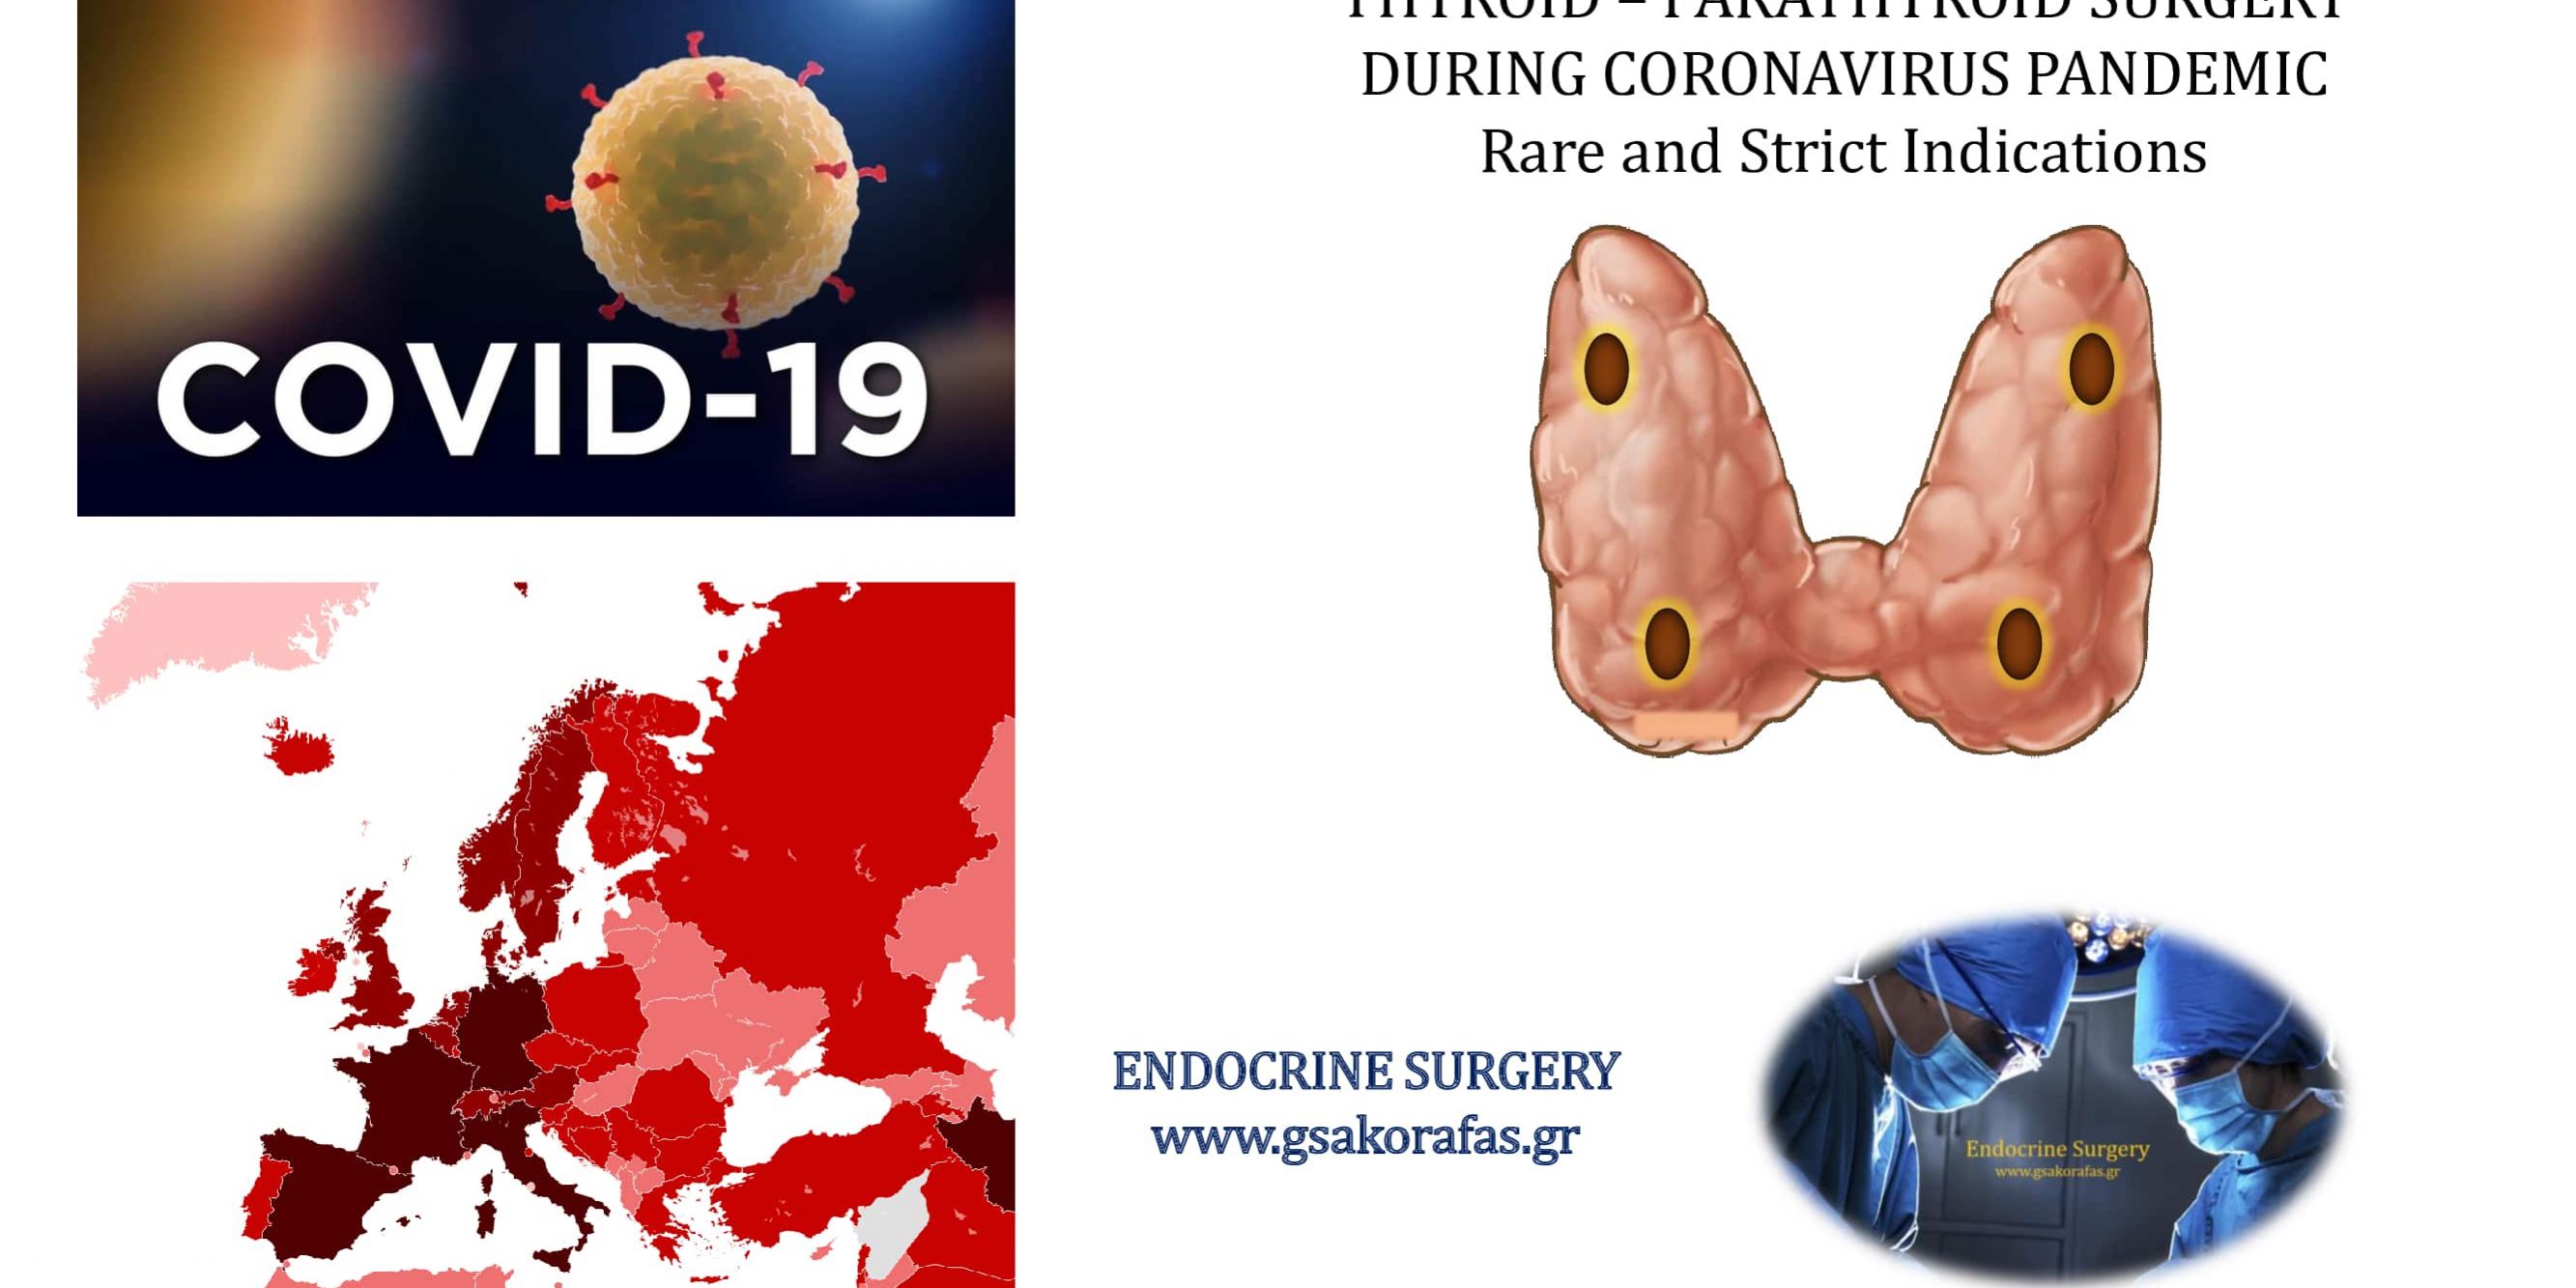 Thyroidectomy-parathyroidectomy: strict indications during coronavirus pandemic